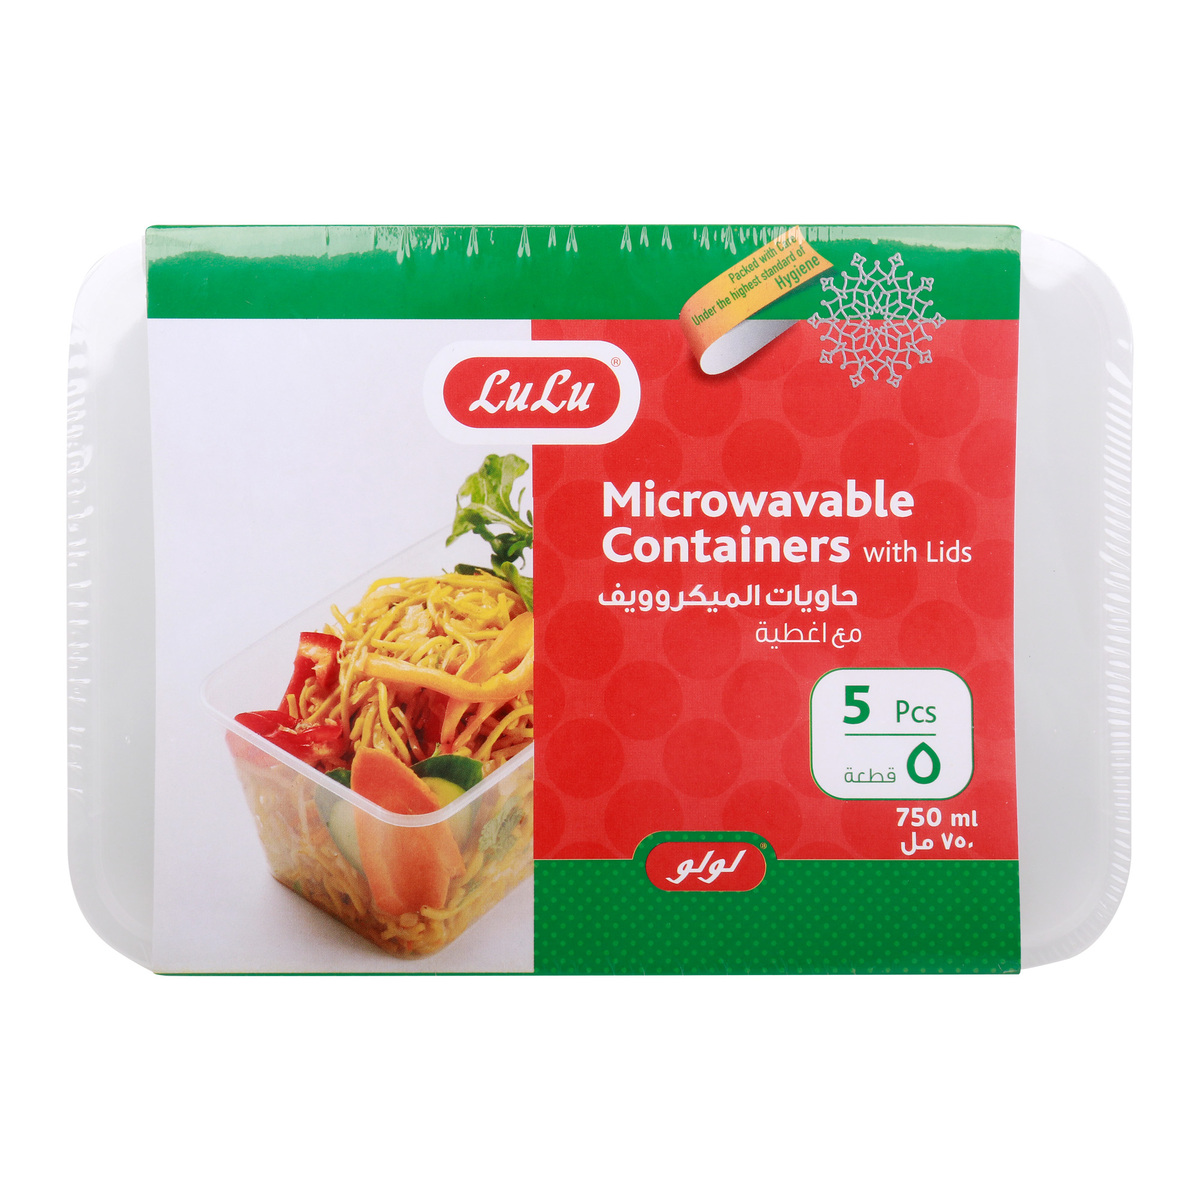 LuLu Microwavable Containers with Lids 750 ml 5 pcs